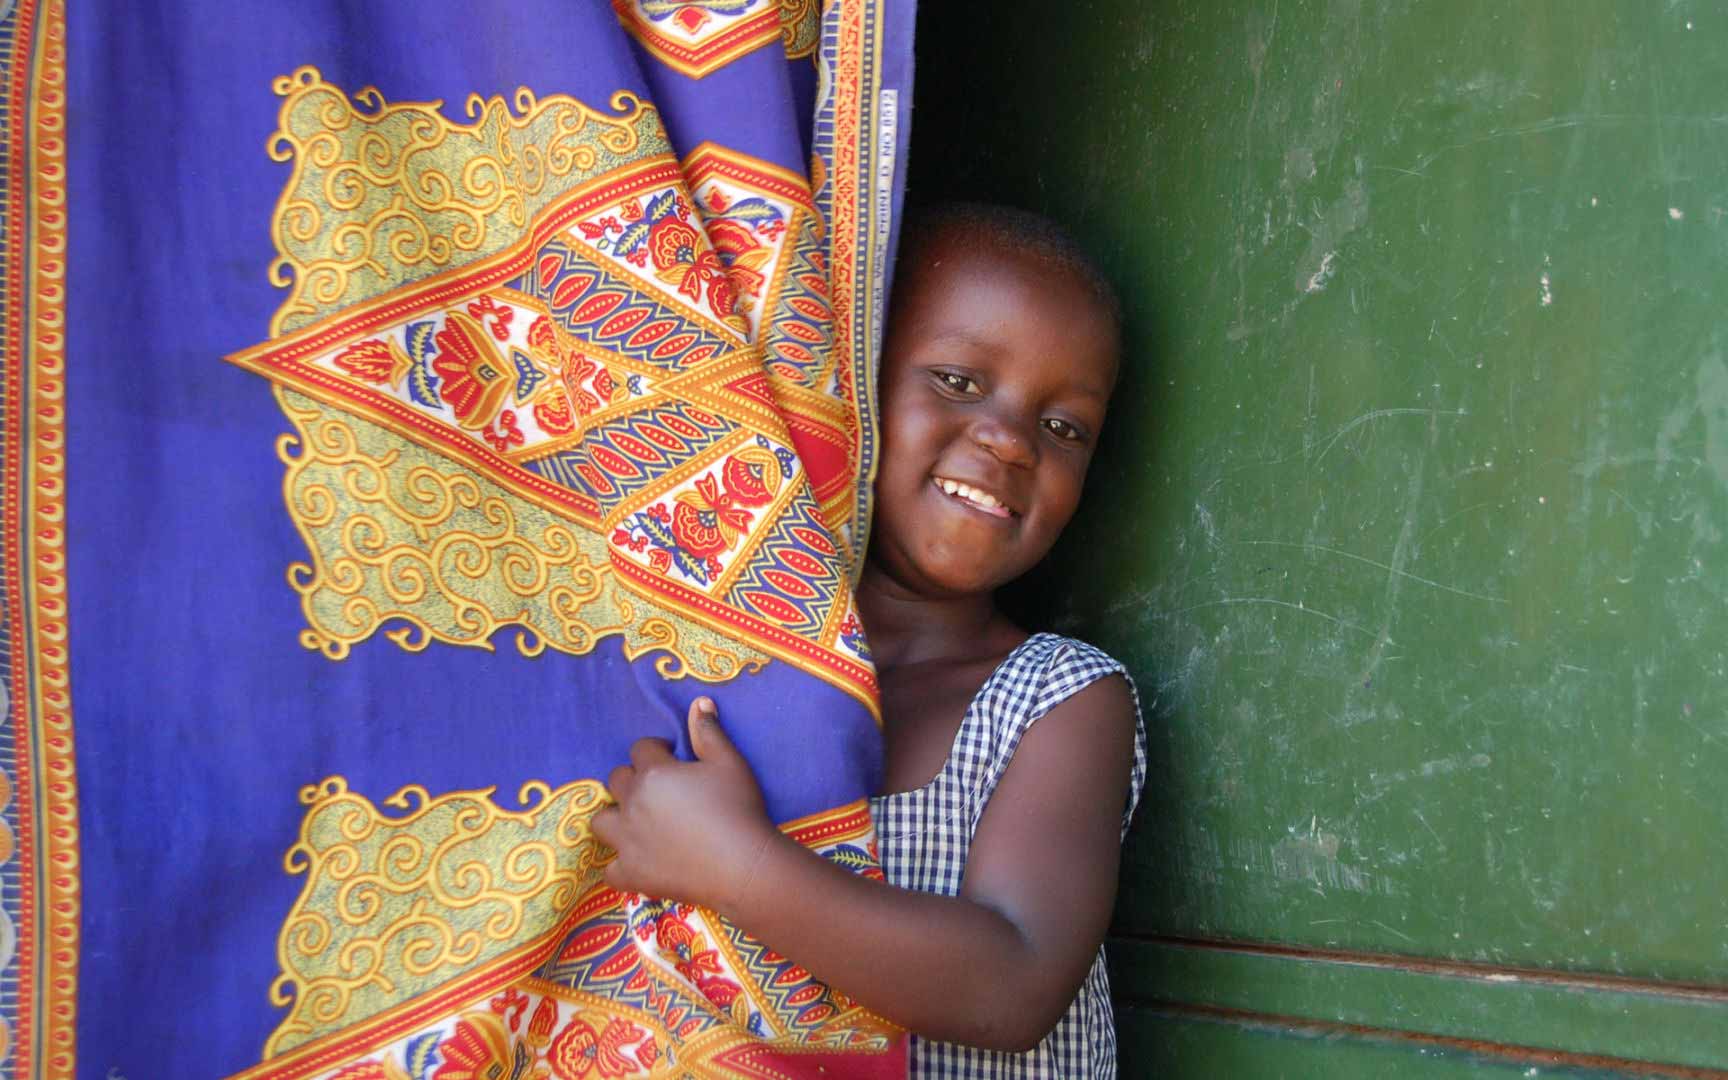 A girl smiling while hiding behind a blanket